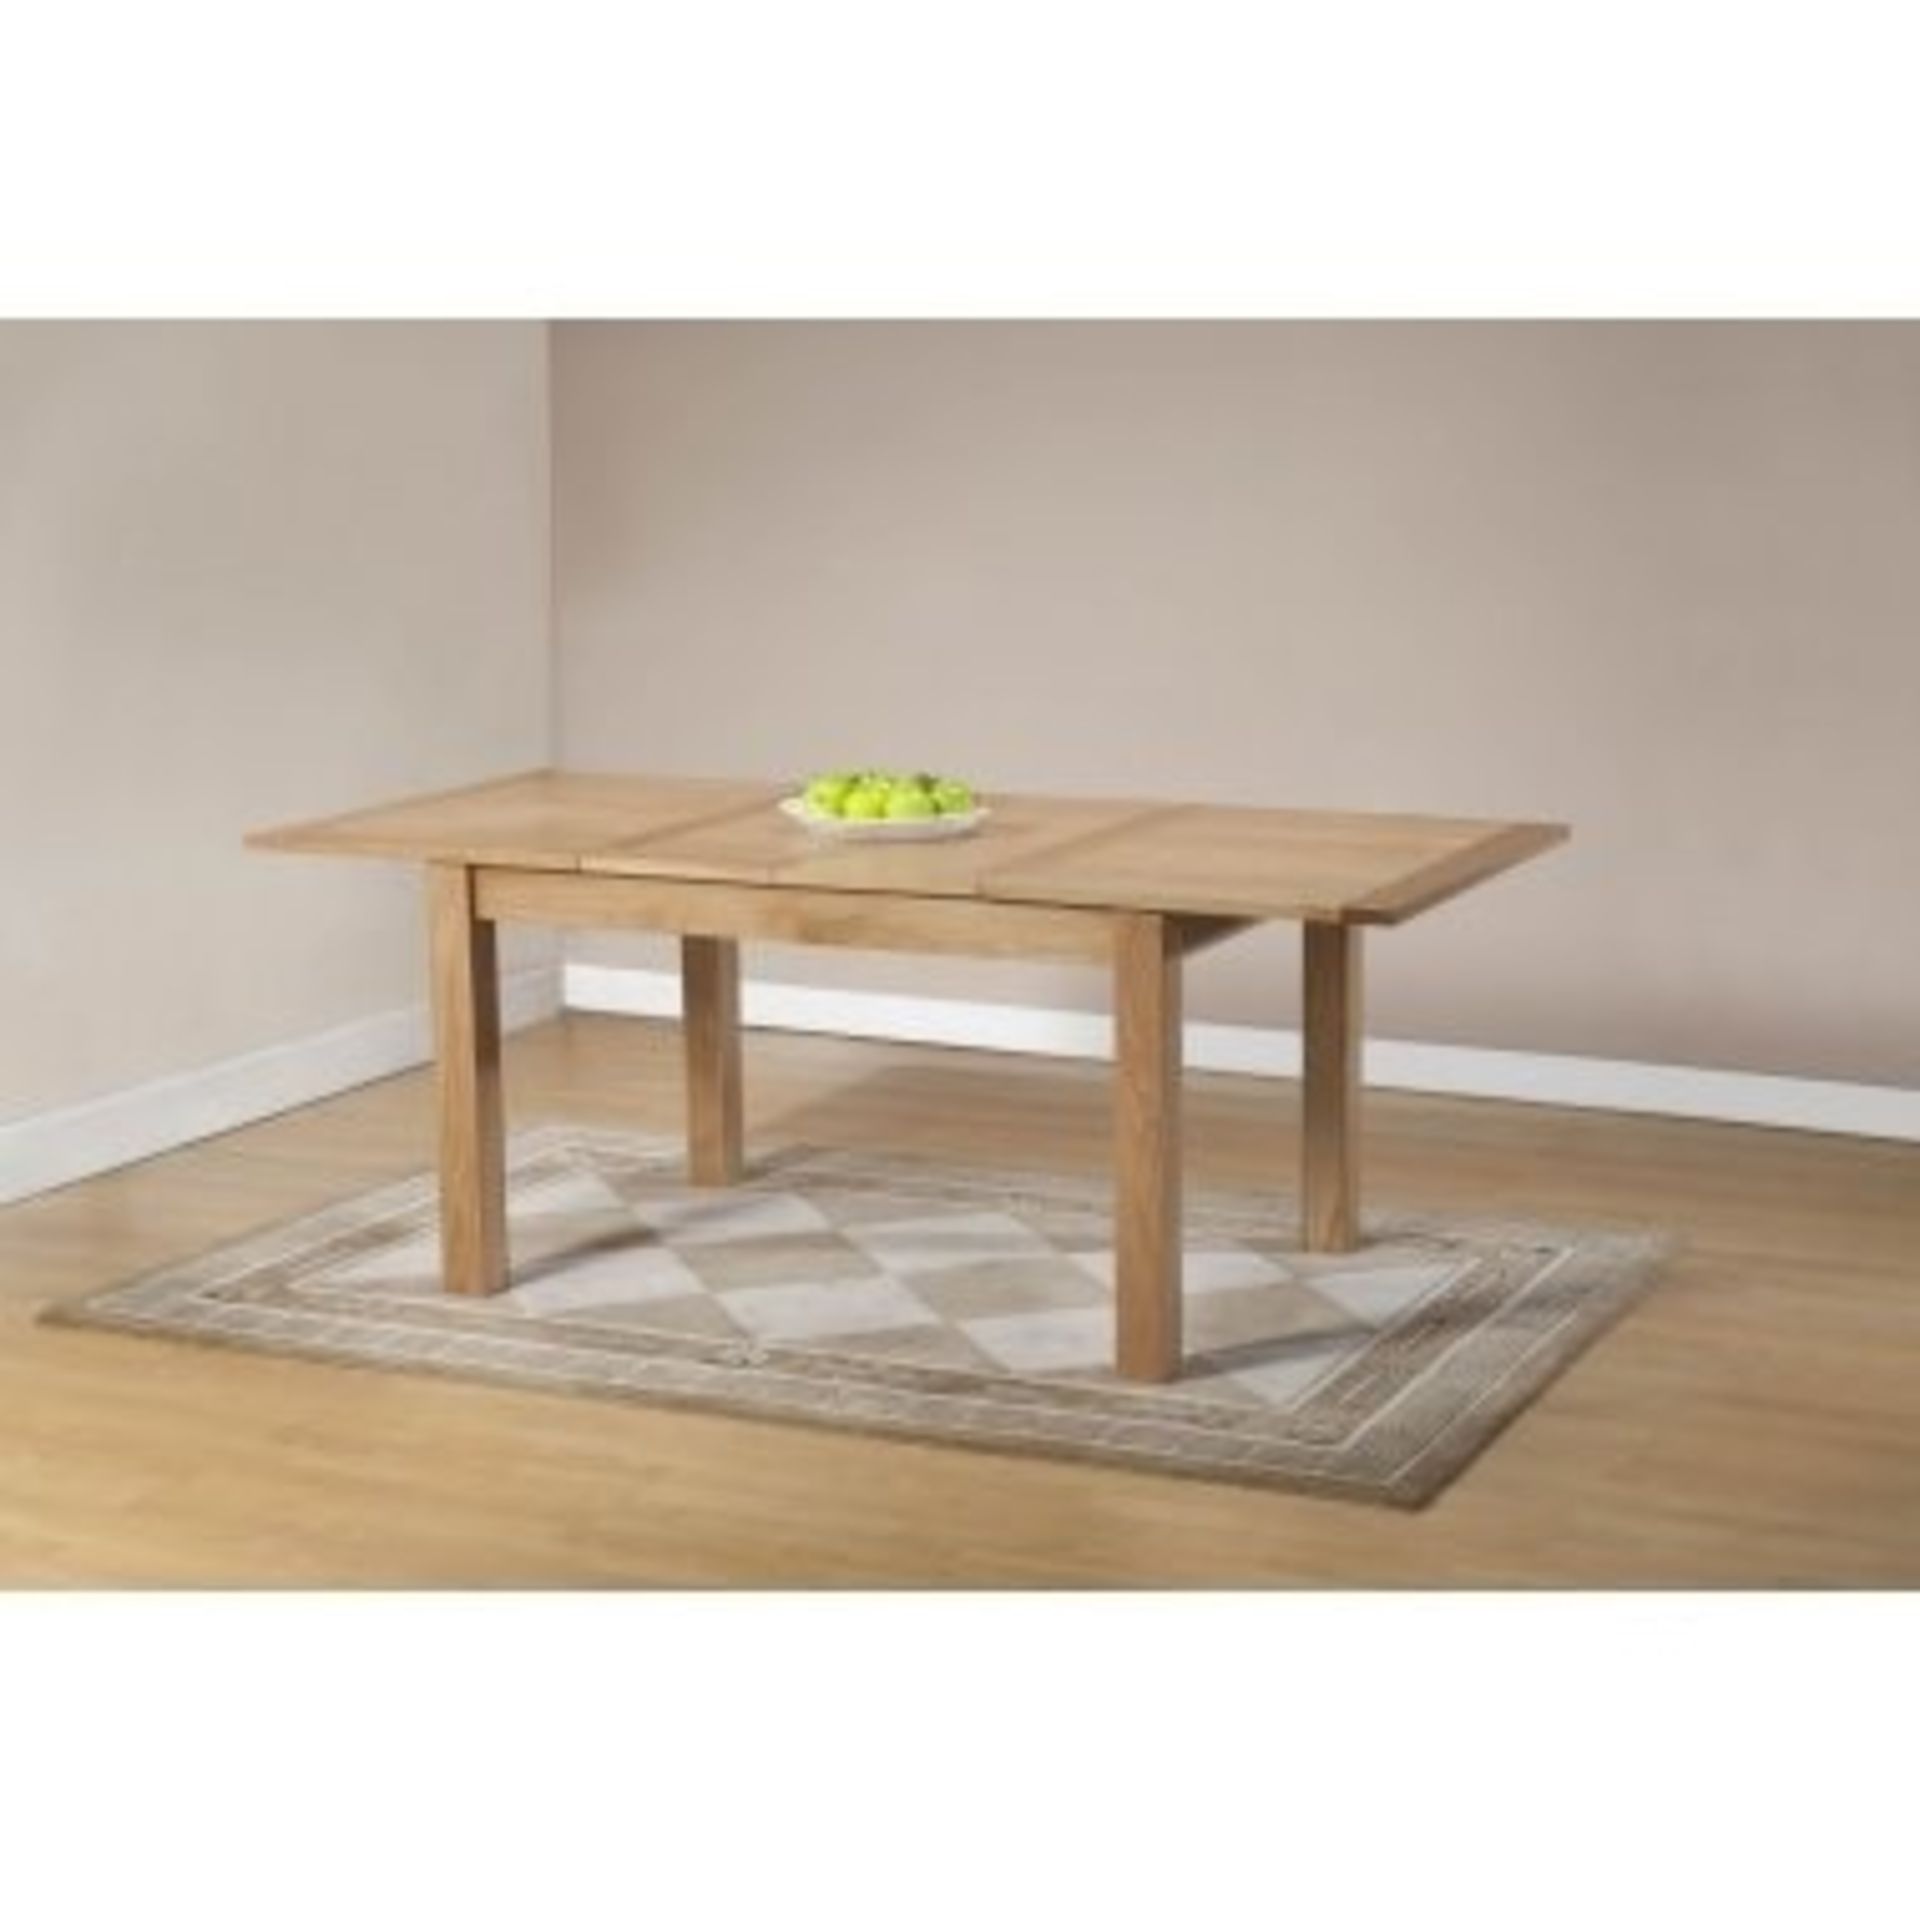 V Brand New Brand New Lucerne Oak Dining Table 132 x 90 Including Two Extention Pieces of 35cm